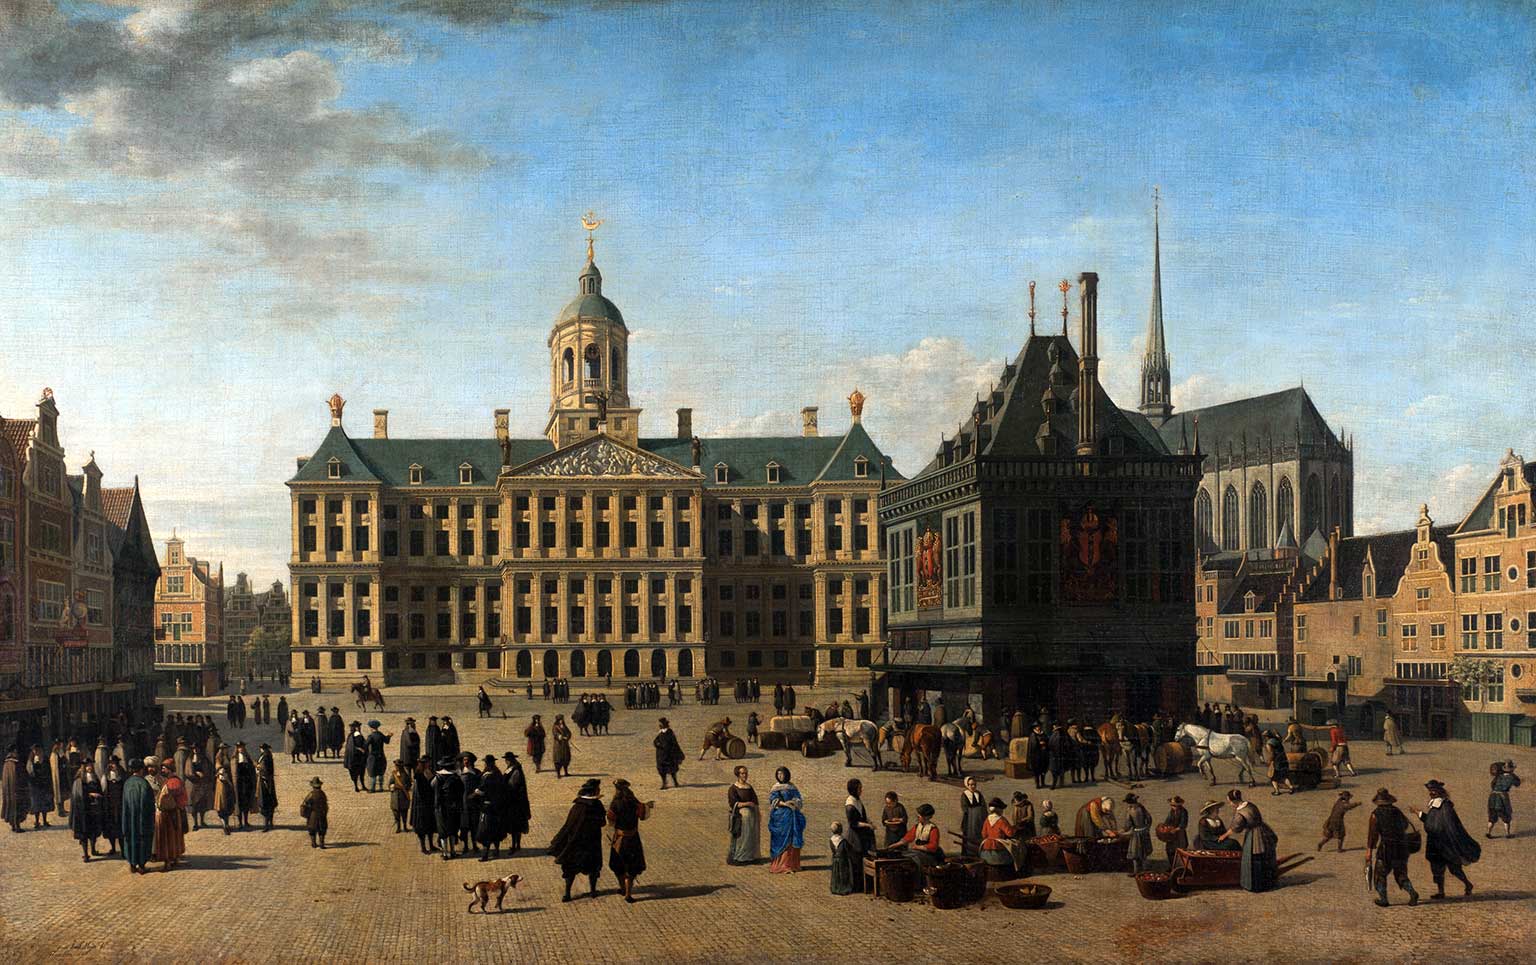 Dam square, Amsterdam, with the old weigh house, painting by Gerrit Adriaensz Berckheyde from 1668